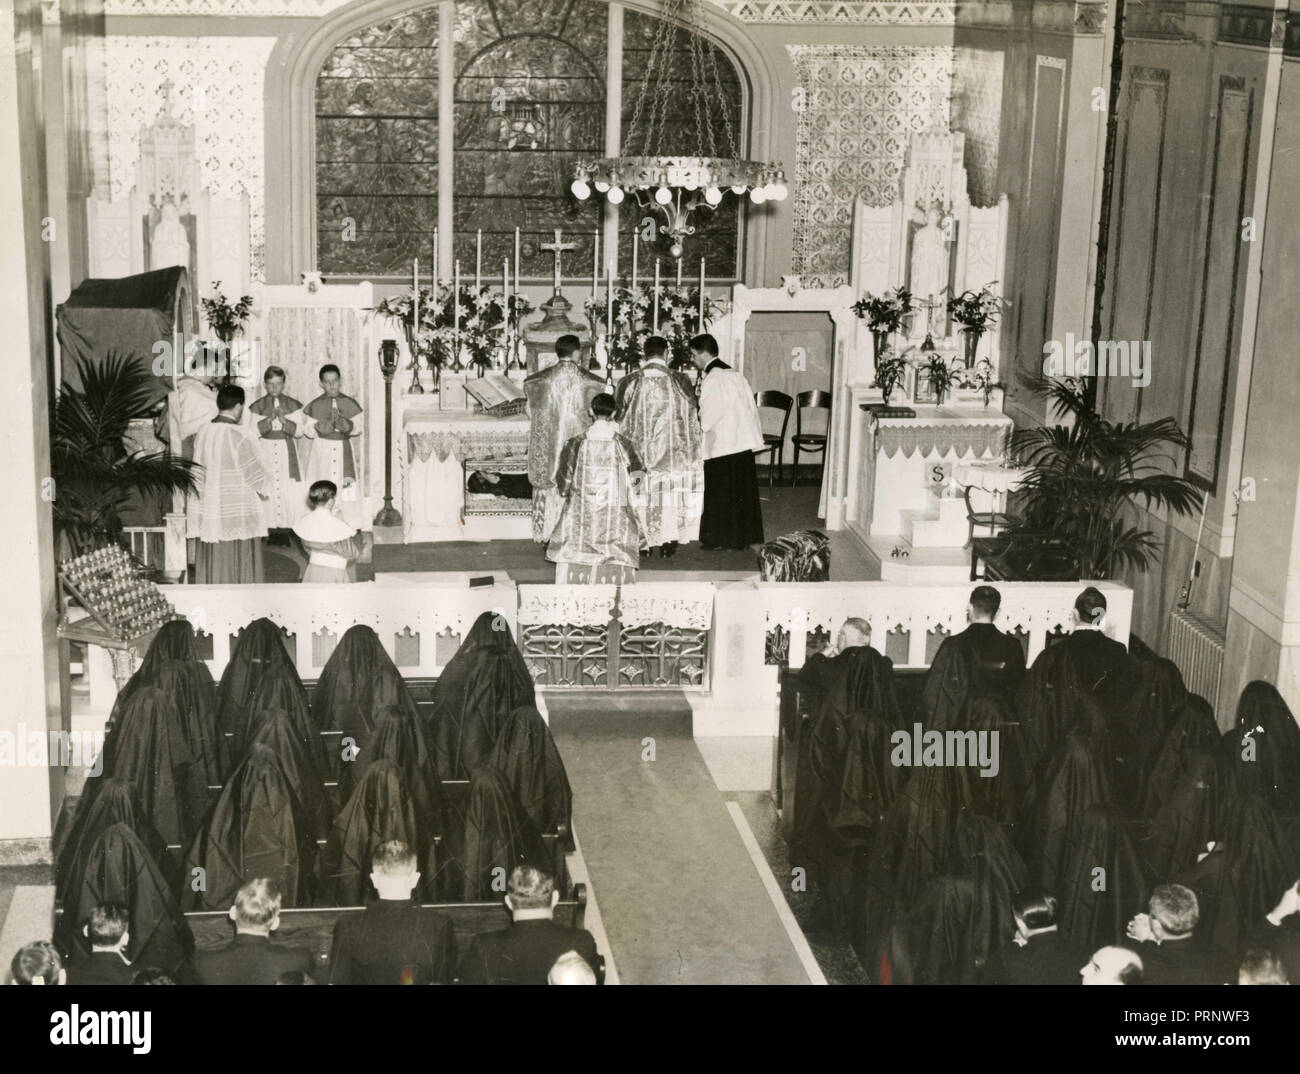 Rev. Stephen Fiedler and Rev. Cicognani celebrating mass at Mother Cabrini's tomb, New York, USA 1938 Stock Photo